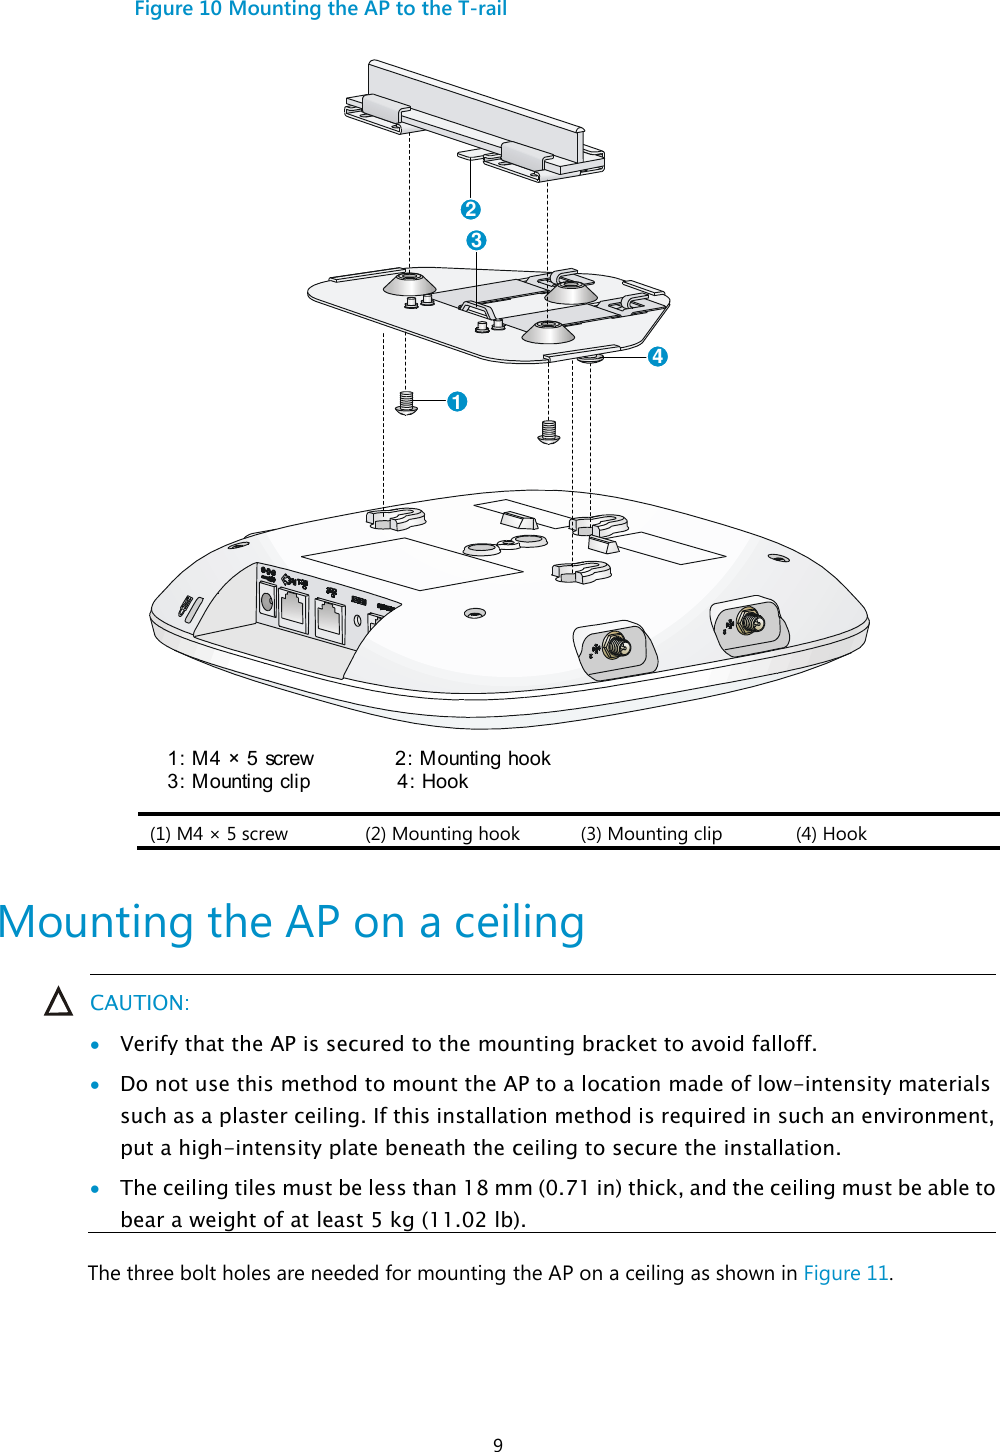  9 Figure 10 Mounting the AP to the T-rail  (1) M4 × 5 screw (2) Mounting hook  (3) Mounting clip  (4) Hook   Mounting the AP on a ceiling  CAUTION:  Verify that the AP is secured to the mounting bracket to avoid falloff.  Do not use this method to mount the AP to a location made of low-intensity materials such as a plaster ceiling. If this installation method is required in such an environment, put a high-intensity plate beneath the ceiling to secure the installation.  The ceiling tiles must be less than 18 mm (0.71 in) thick, and the ceiling must be able to bear a weight of at least 5 kg (11.02 lb).  The three bolt holes are needed for mounting the AP on a ceiling as shown in Figure 11. 1: M4 × 5 screw             2: Mounting hook3: Mounting clip              4: Hook 1234